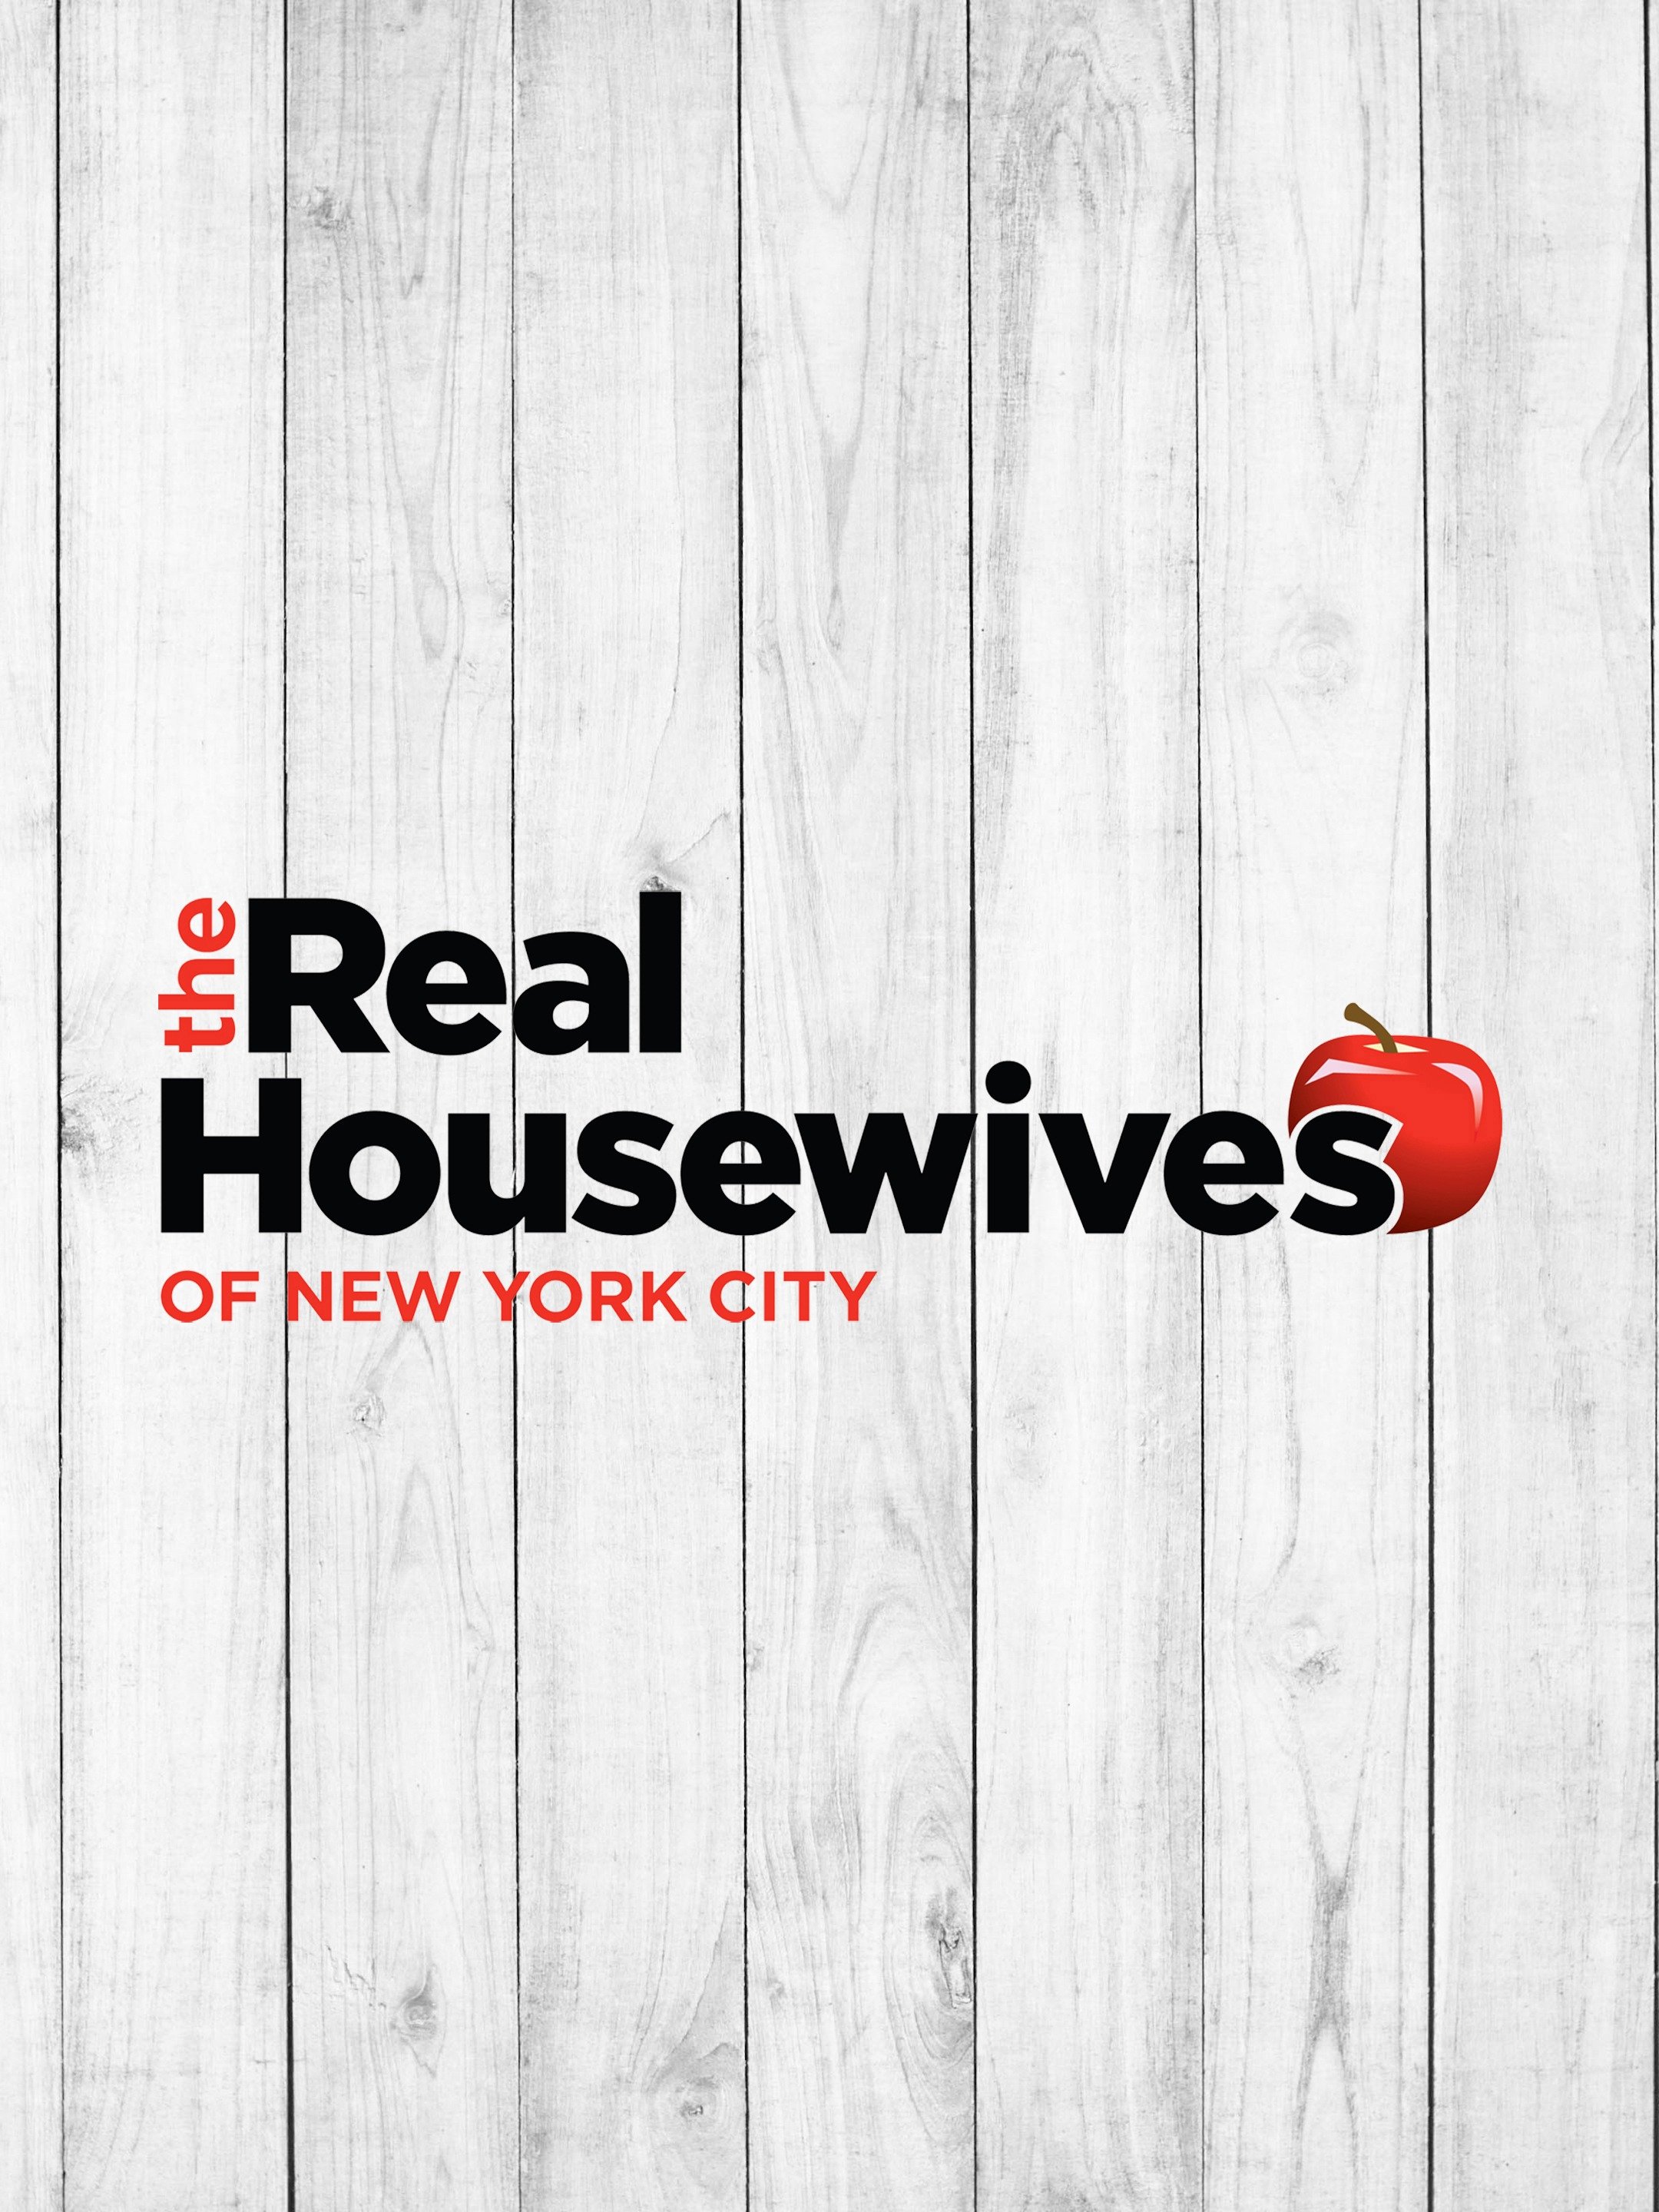 The Real Housewives of New York City photo